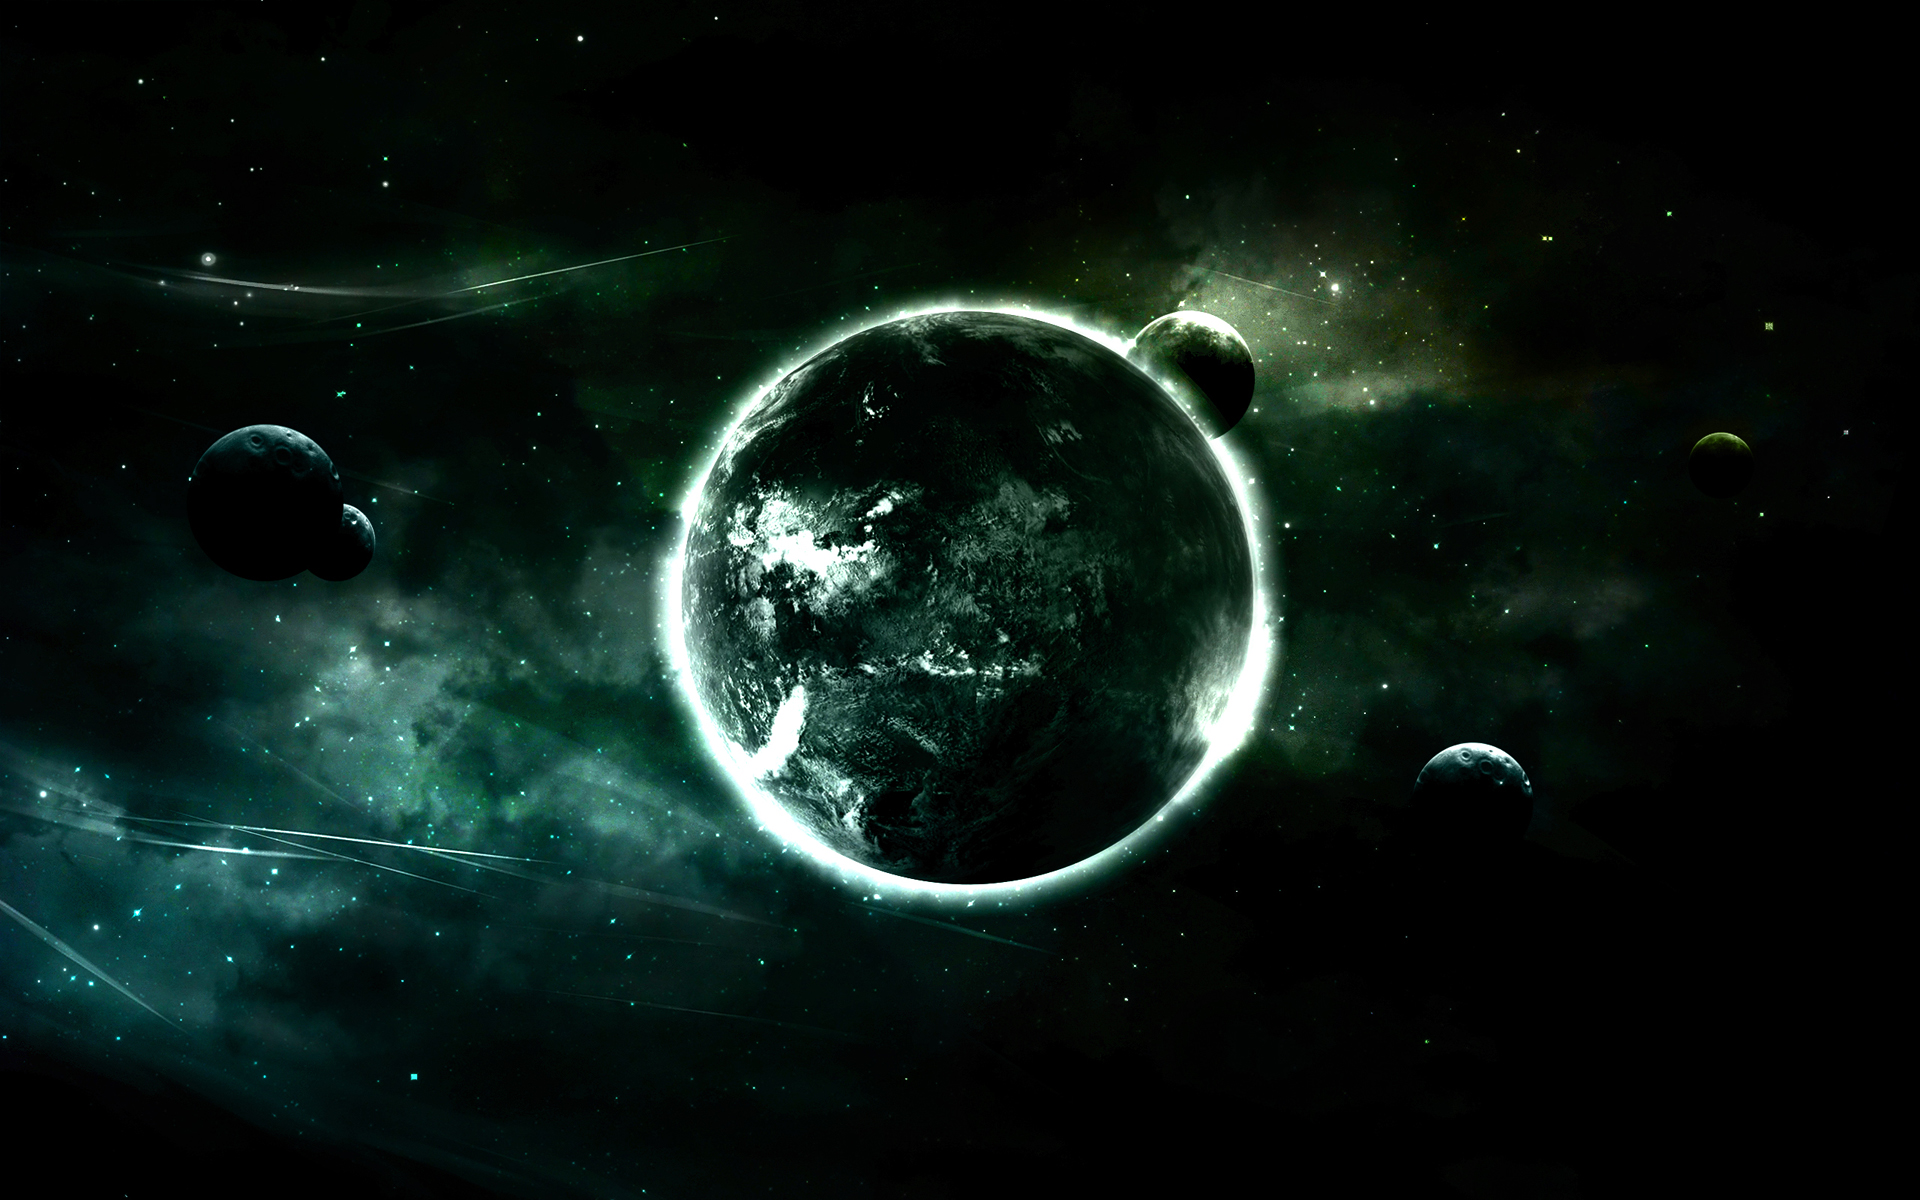 Wallpaper dark, Star, night, planet, space ships, Sci Fi images for  desktop, section космос - download